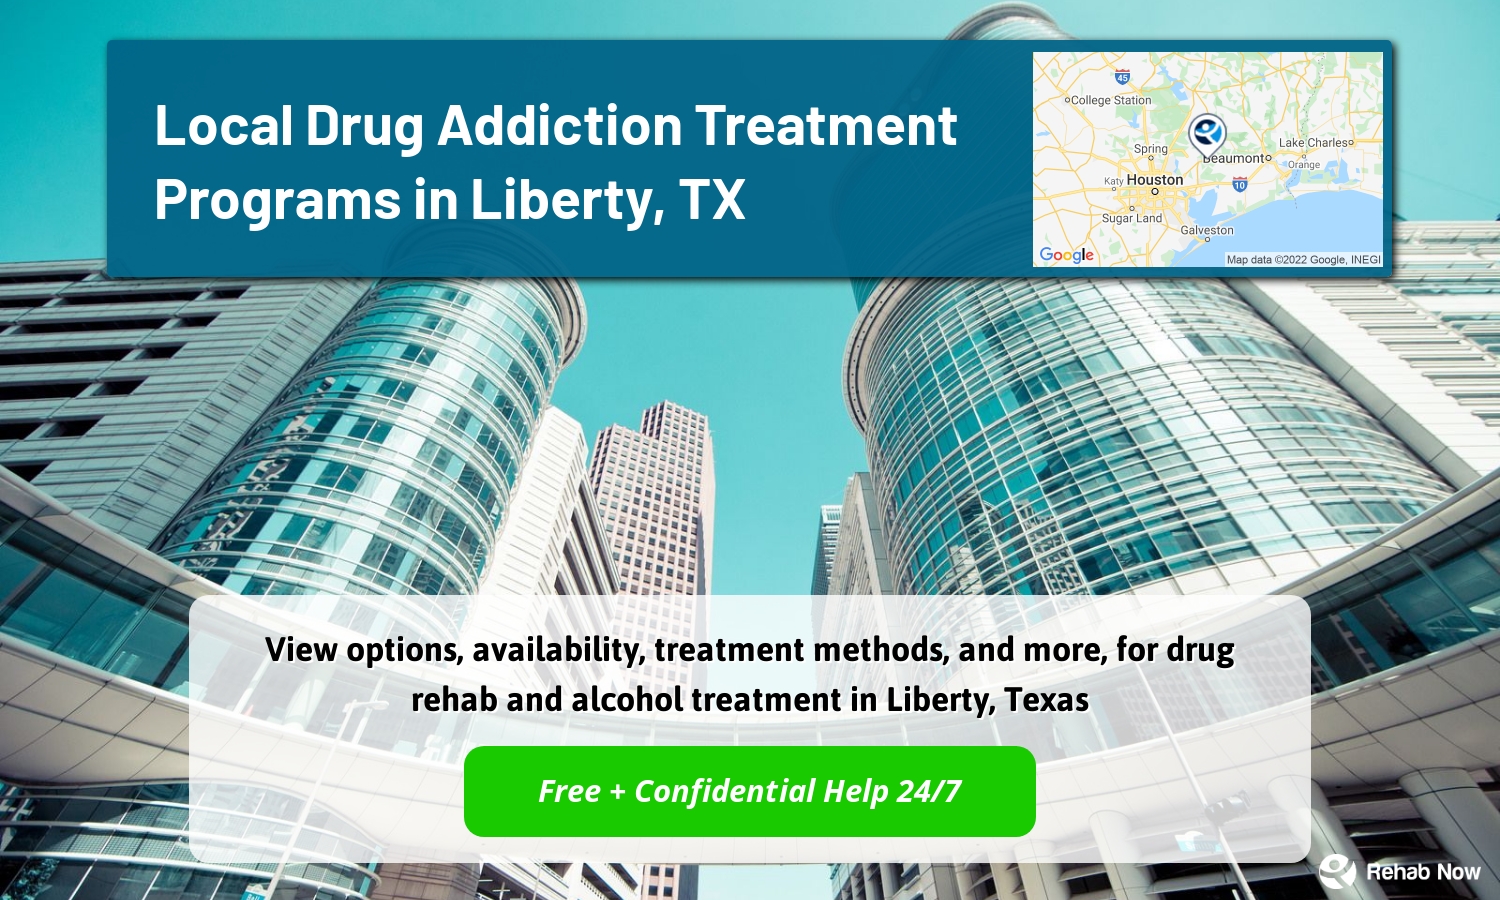 View options, availability, treatment methods, and more, for drug rehab and alcohol treatment in Liberty, Texas